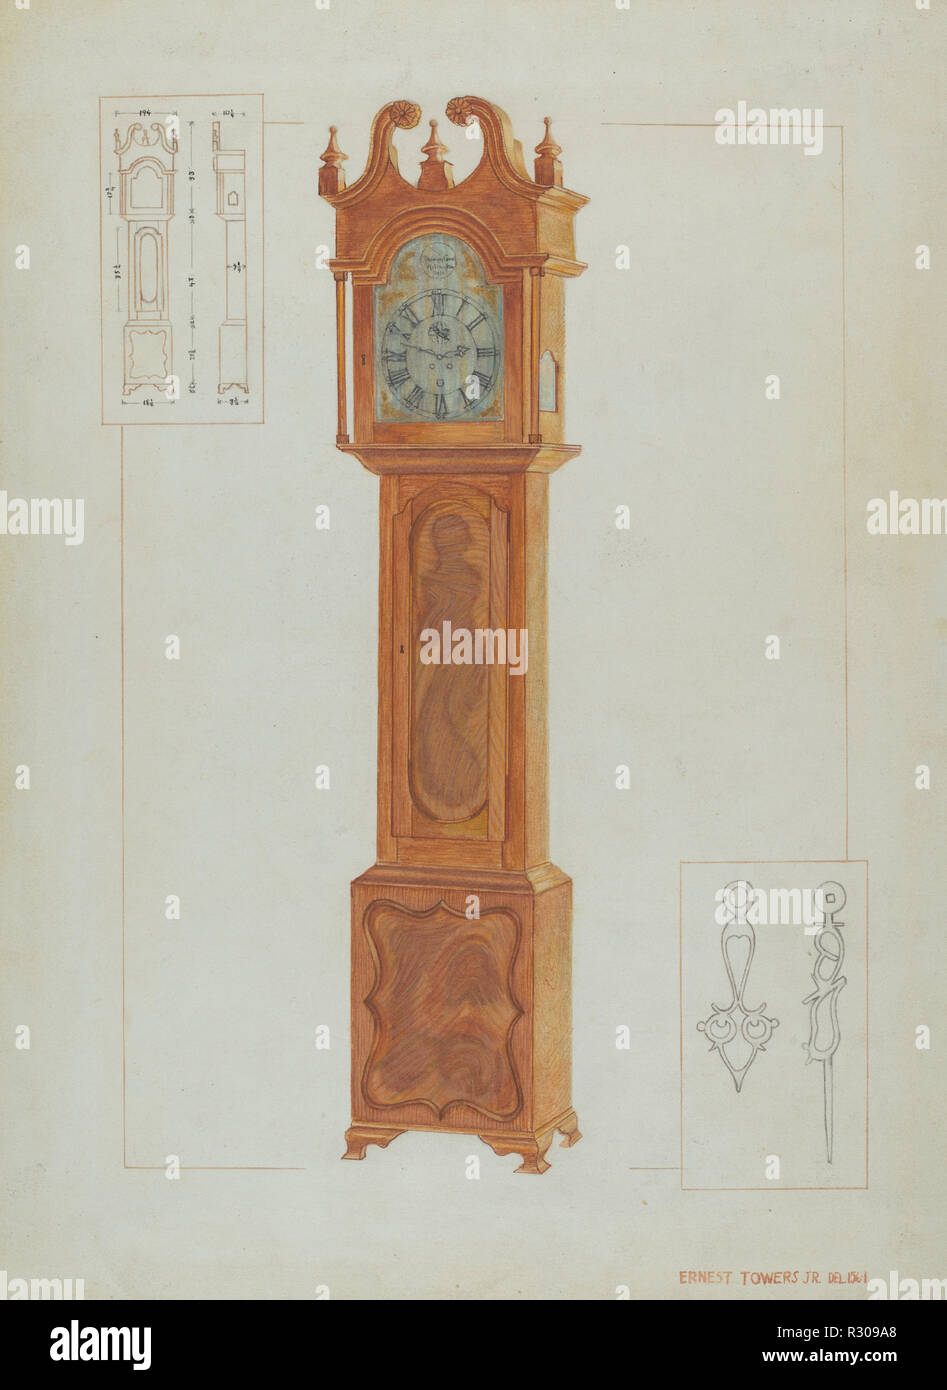 Grandfather's Clock. Dated: c. 1936. Dimensions: overall: 30.4 x 22.1 cm (11 15/16 x 8 11/16 in.)  Original IAD Object: 103'overall height; 18 1/2' max. width. See verso of data sh. for dets.. Medium: watercolor, colored pencil, pen and ink, and graphite on paper. Museum: National Gallery of Art, Washington DC. Author: Ernest A. Towers, Jr. Stock Photo